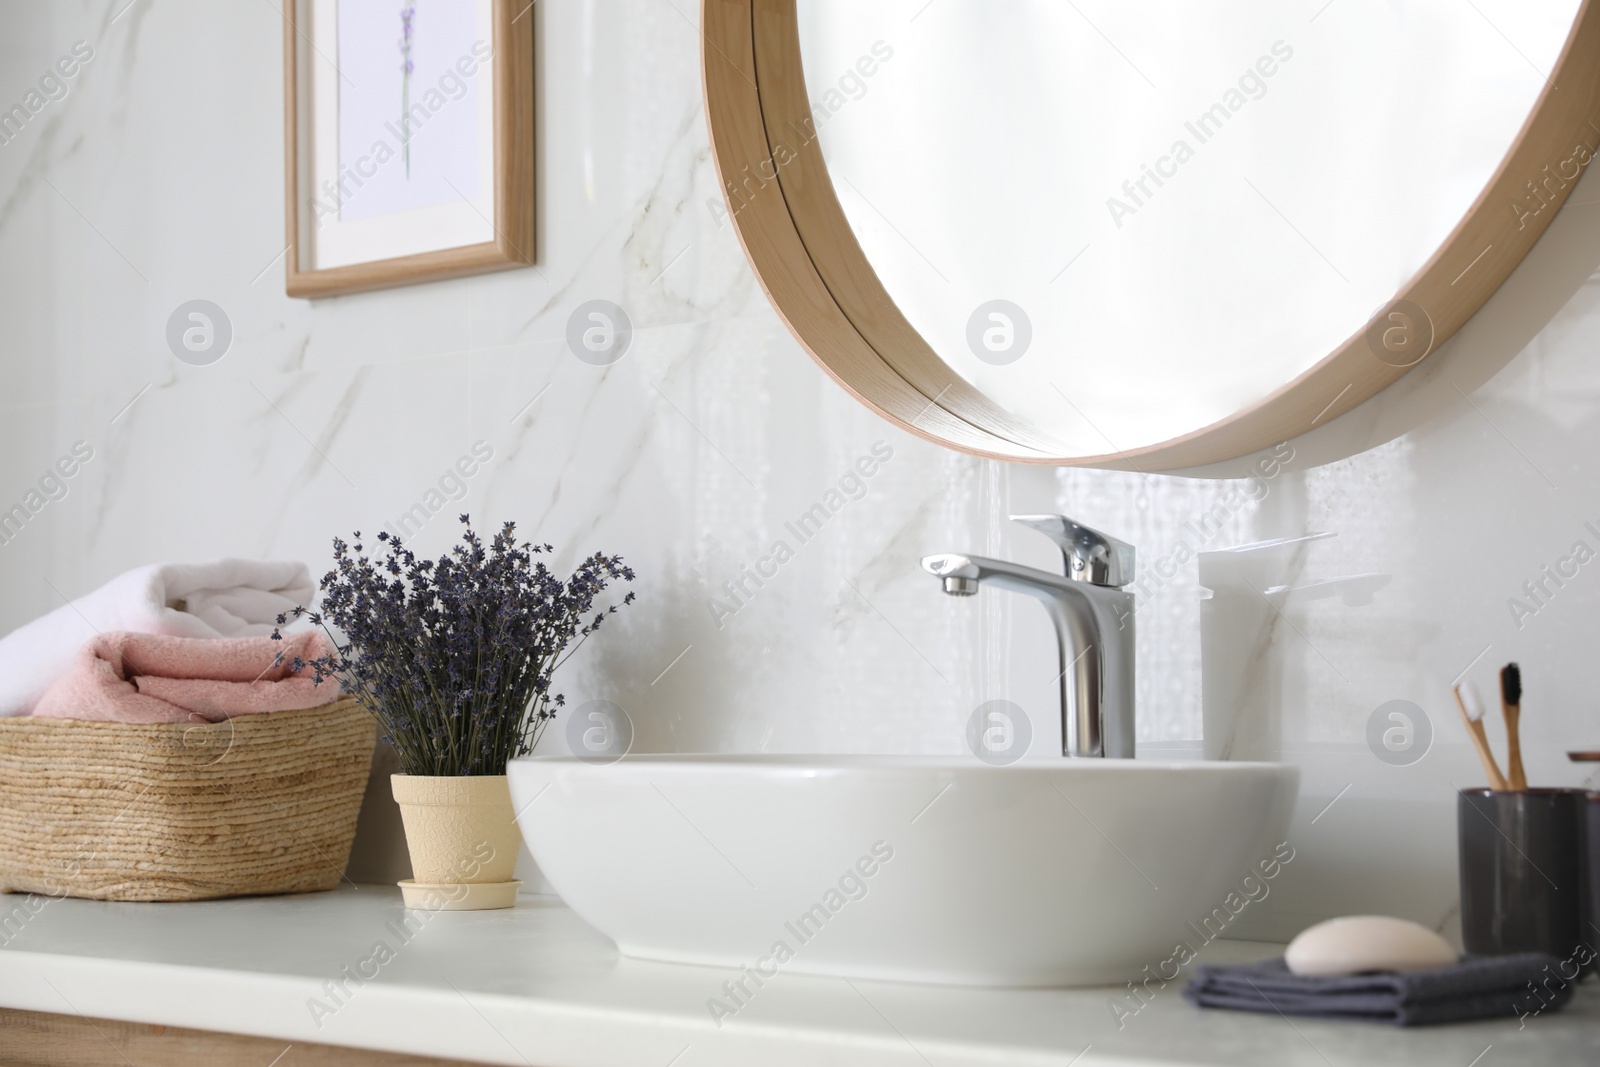 Photo of Bathroom counter with vessel sink, flowers and towels in bathroom interior. Idea for design